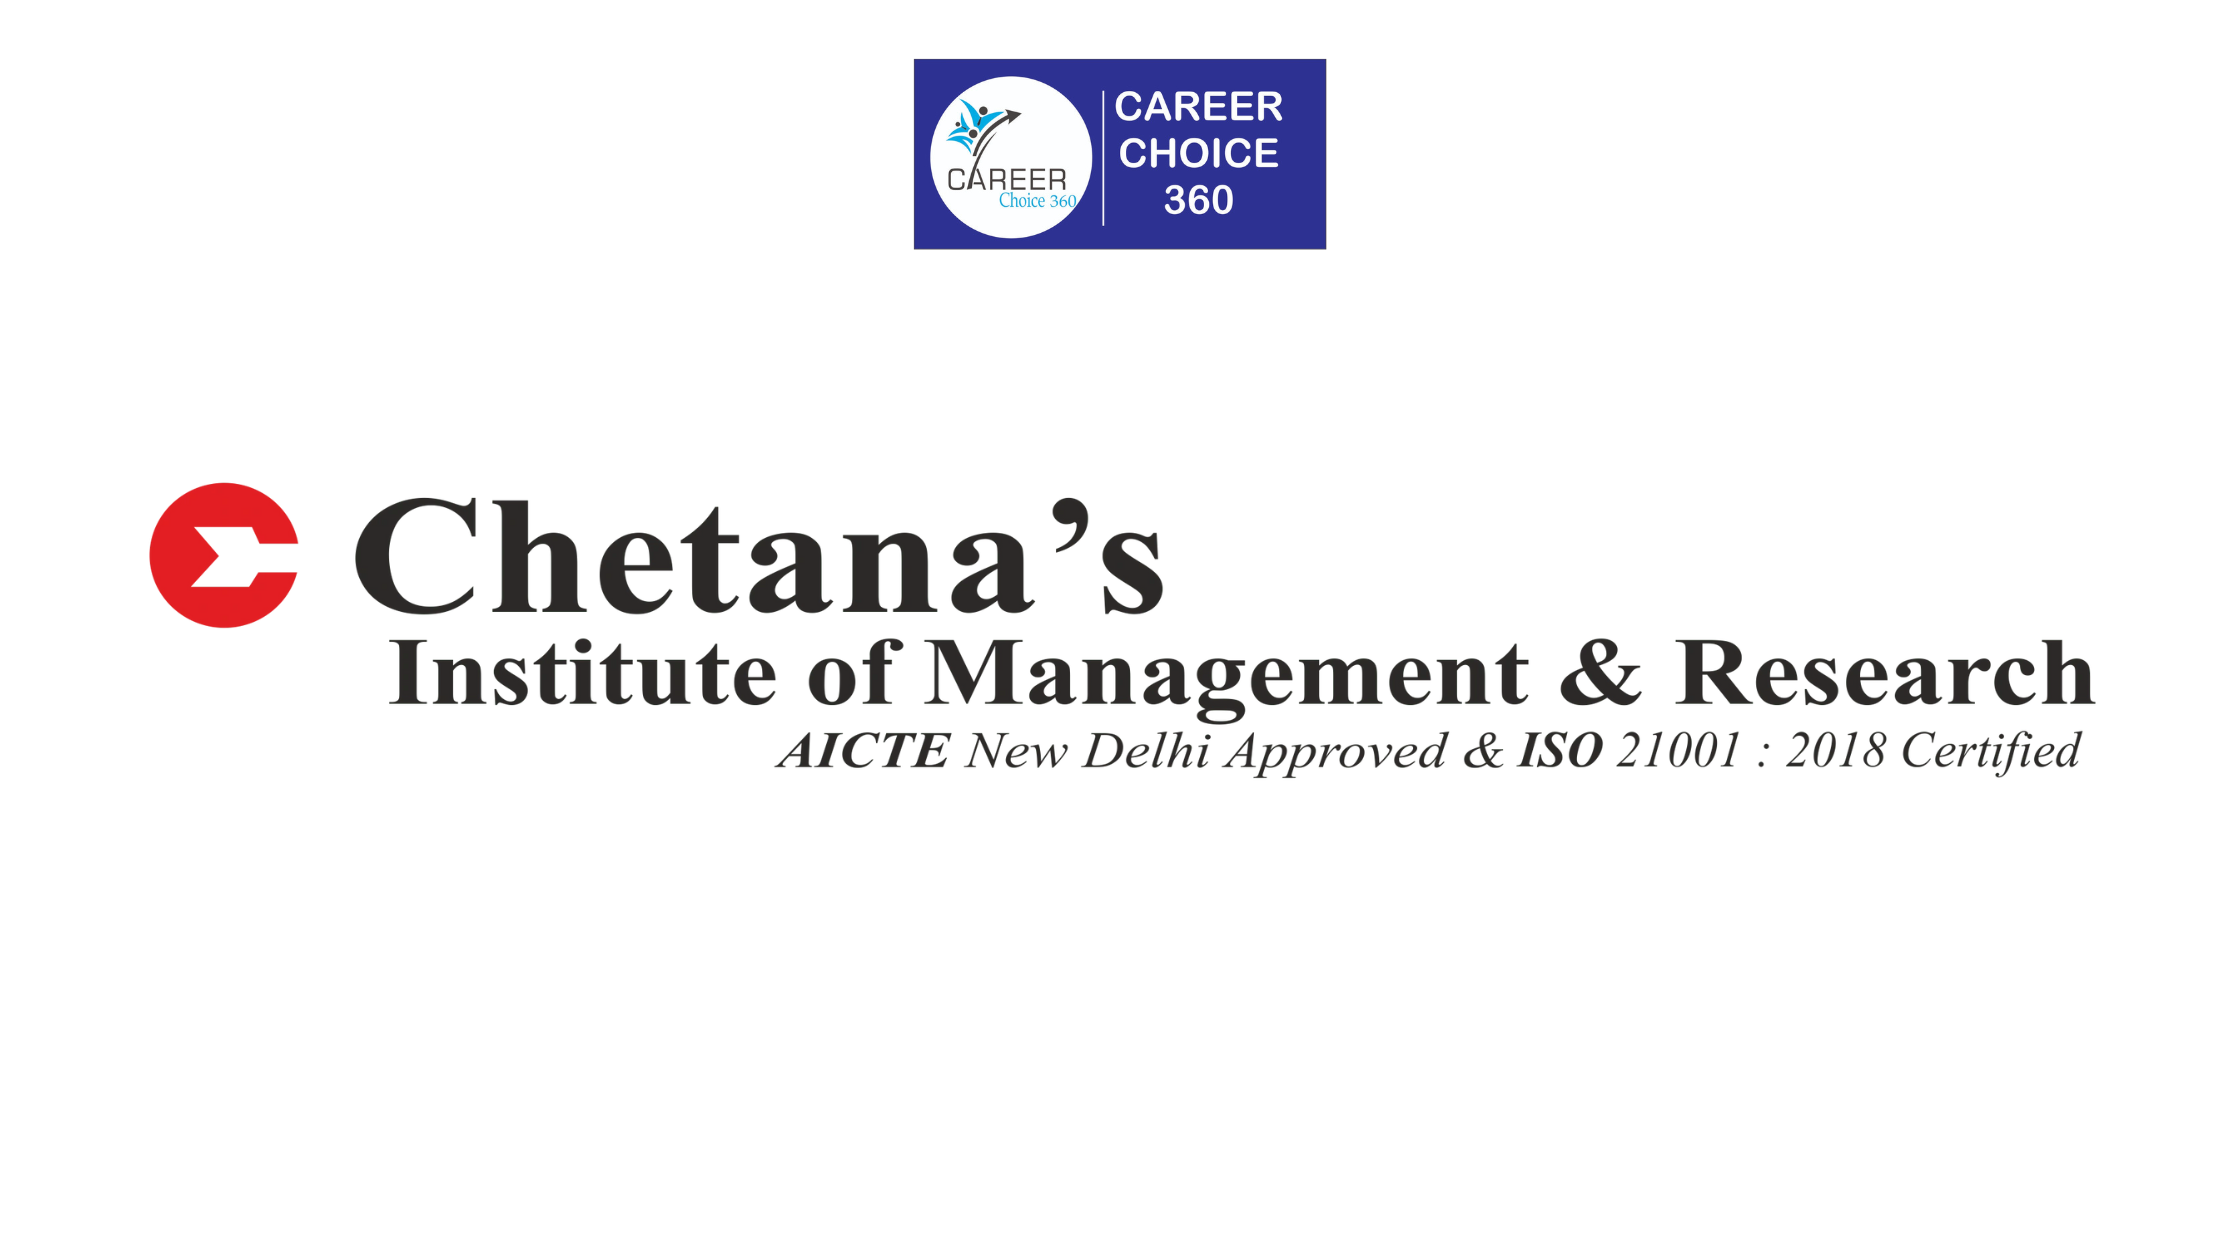 You are currently viewing Chetana’s Institute of Management and Research: Highlights, Courses and Fees, Admissions, Selection Criteria, Eligibility Criteria, Placement, Ranking